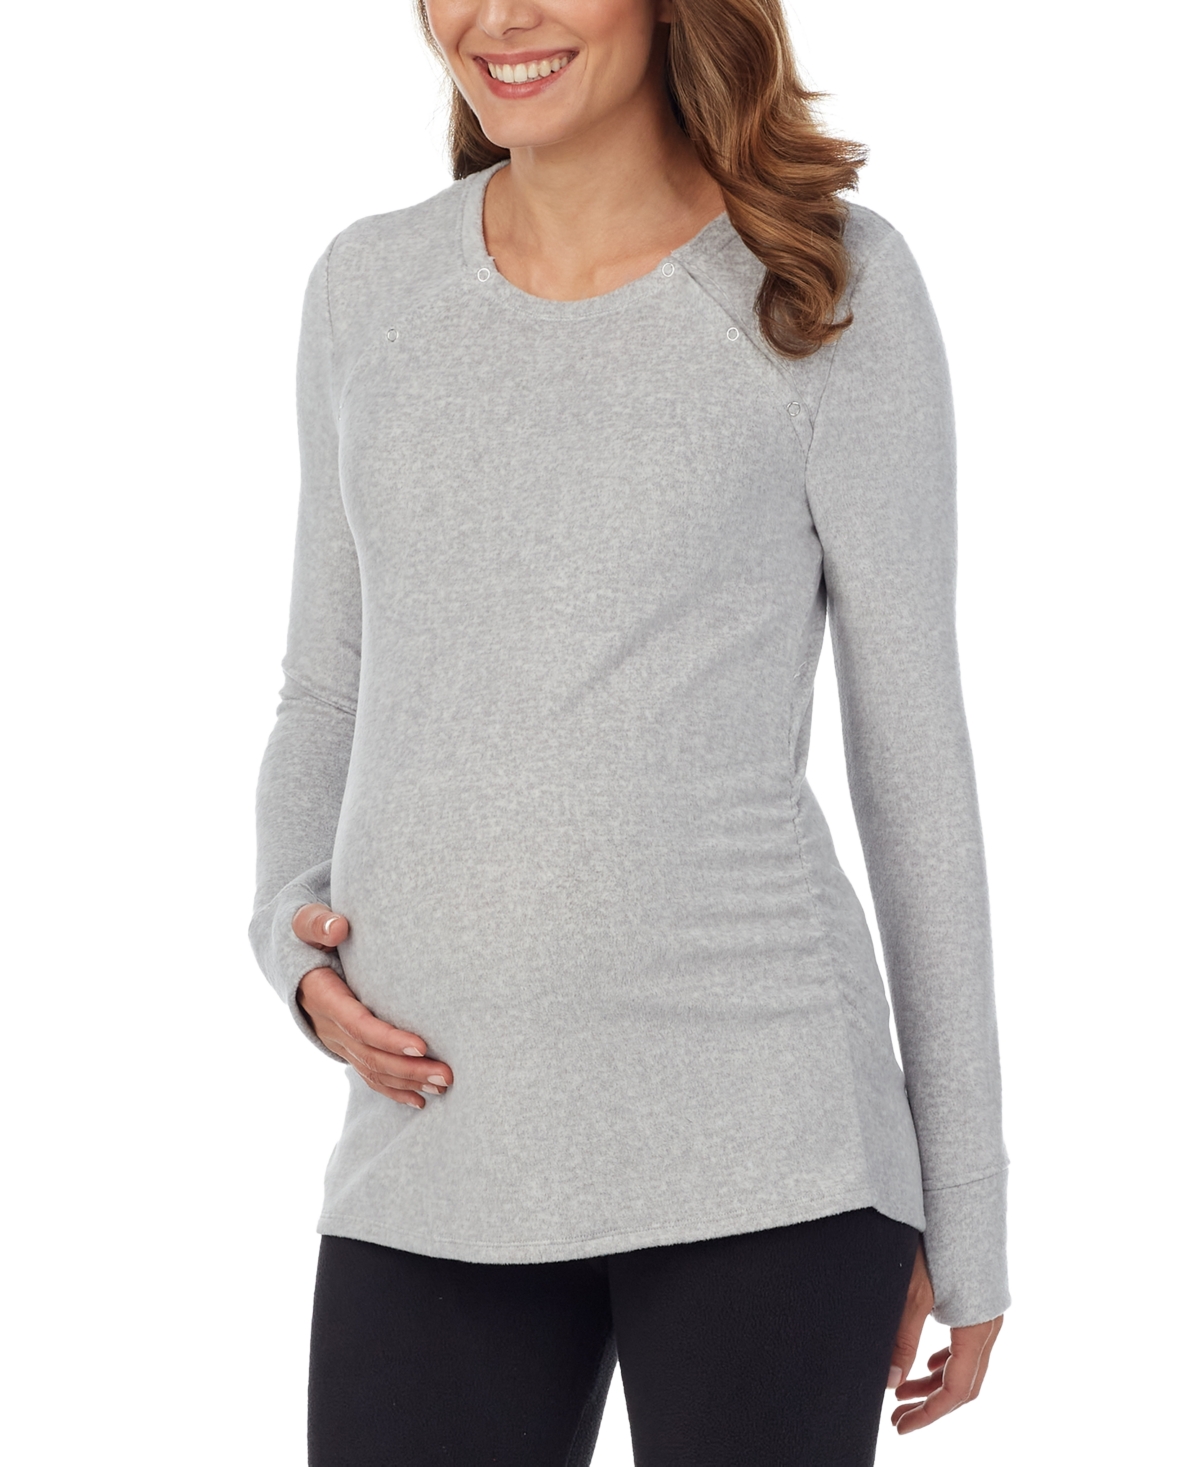 Cuddl Duds Women's Long-sleeve Snap-front Maternity Top In Light Grey Heather